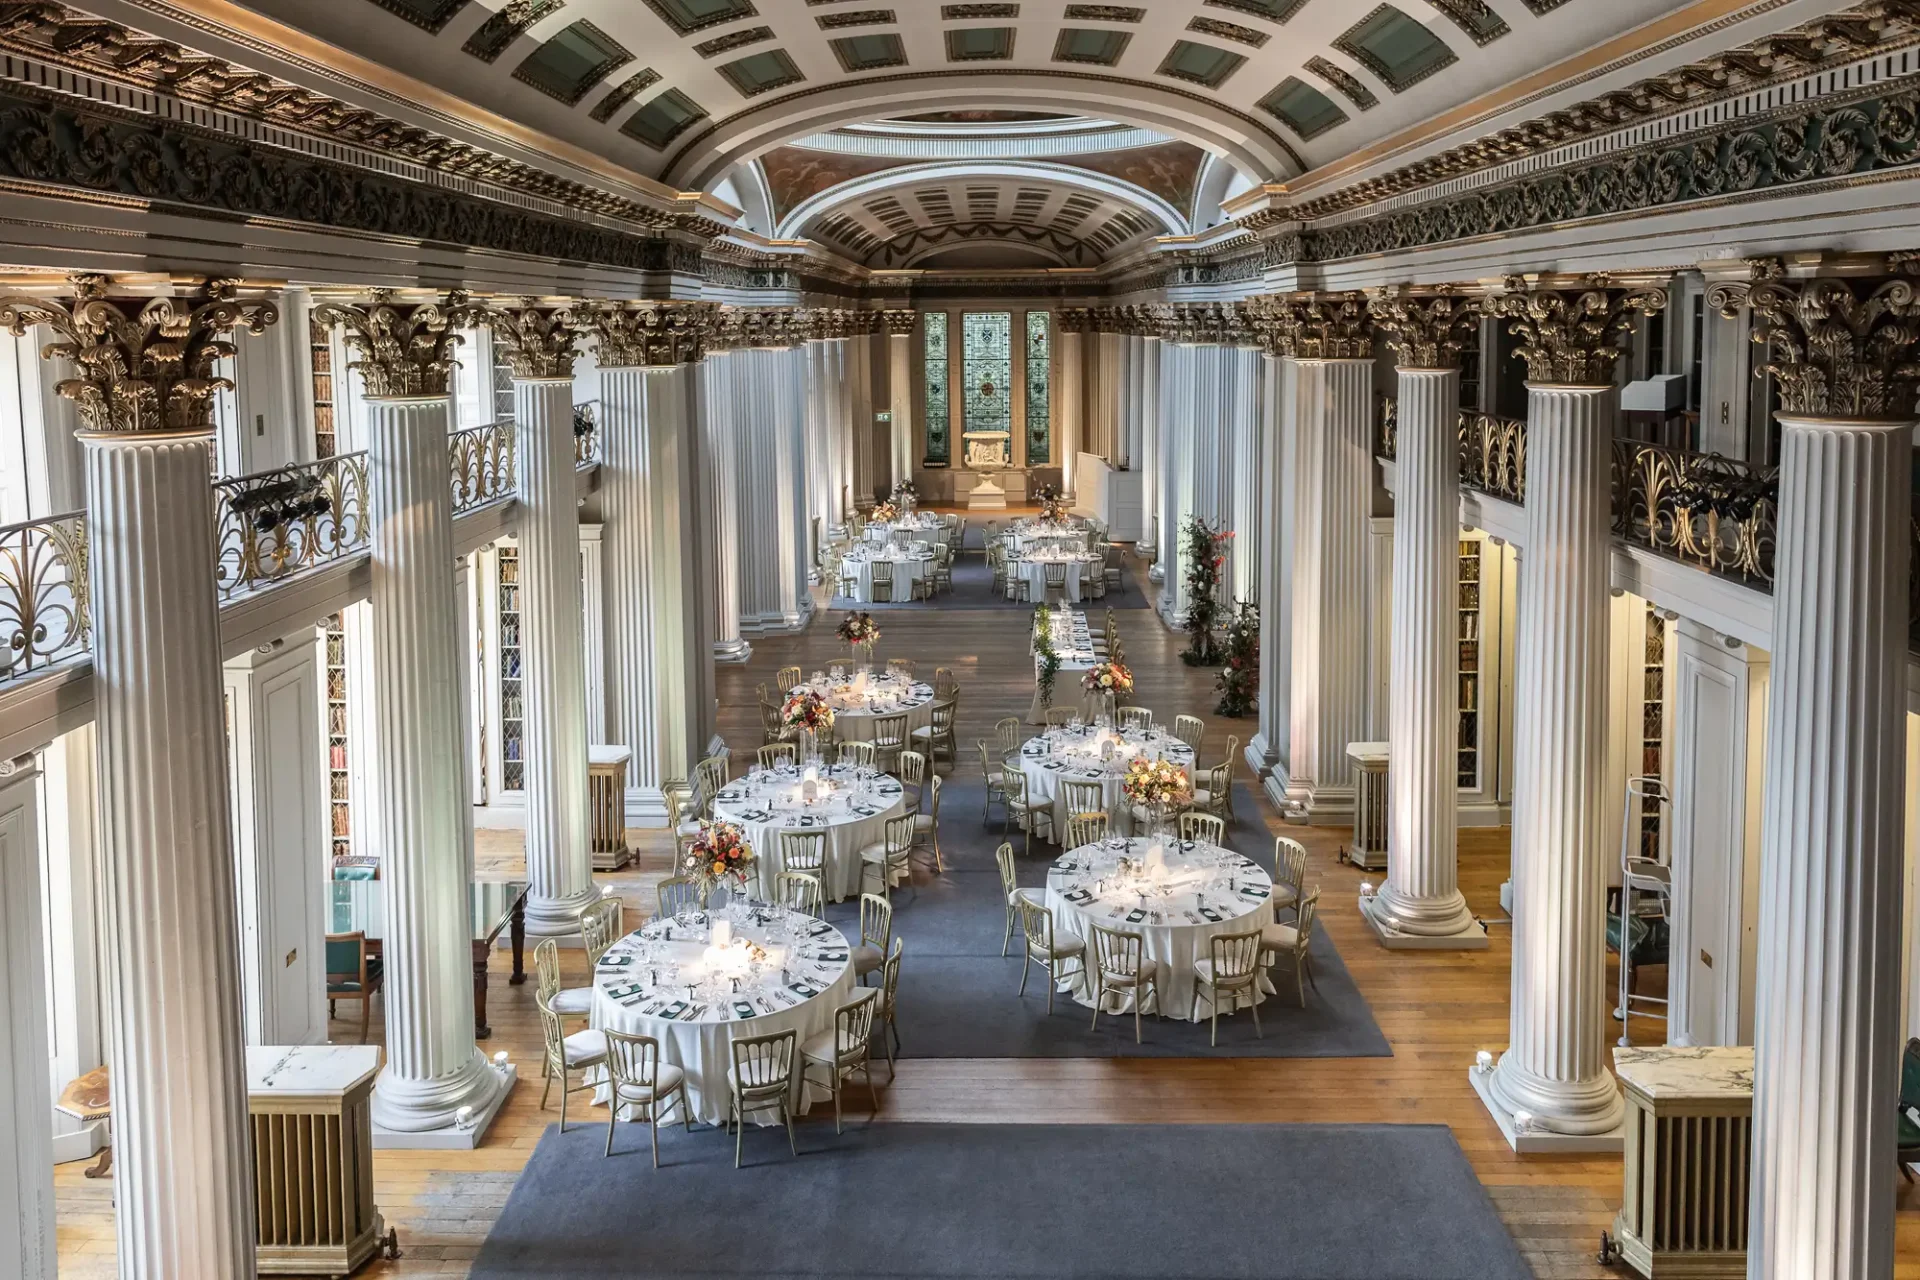 Elegant dining hall with round tables set for an event, featuring classical white columns and ornate balconies.